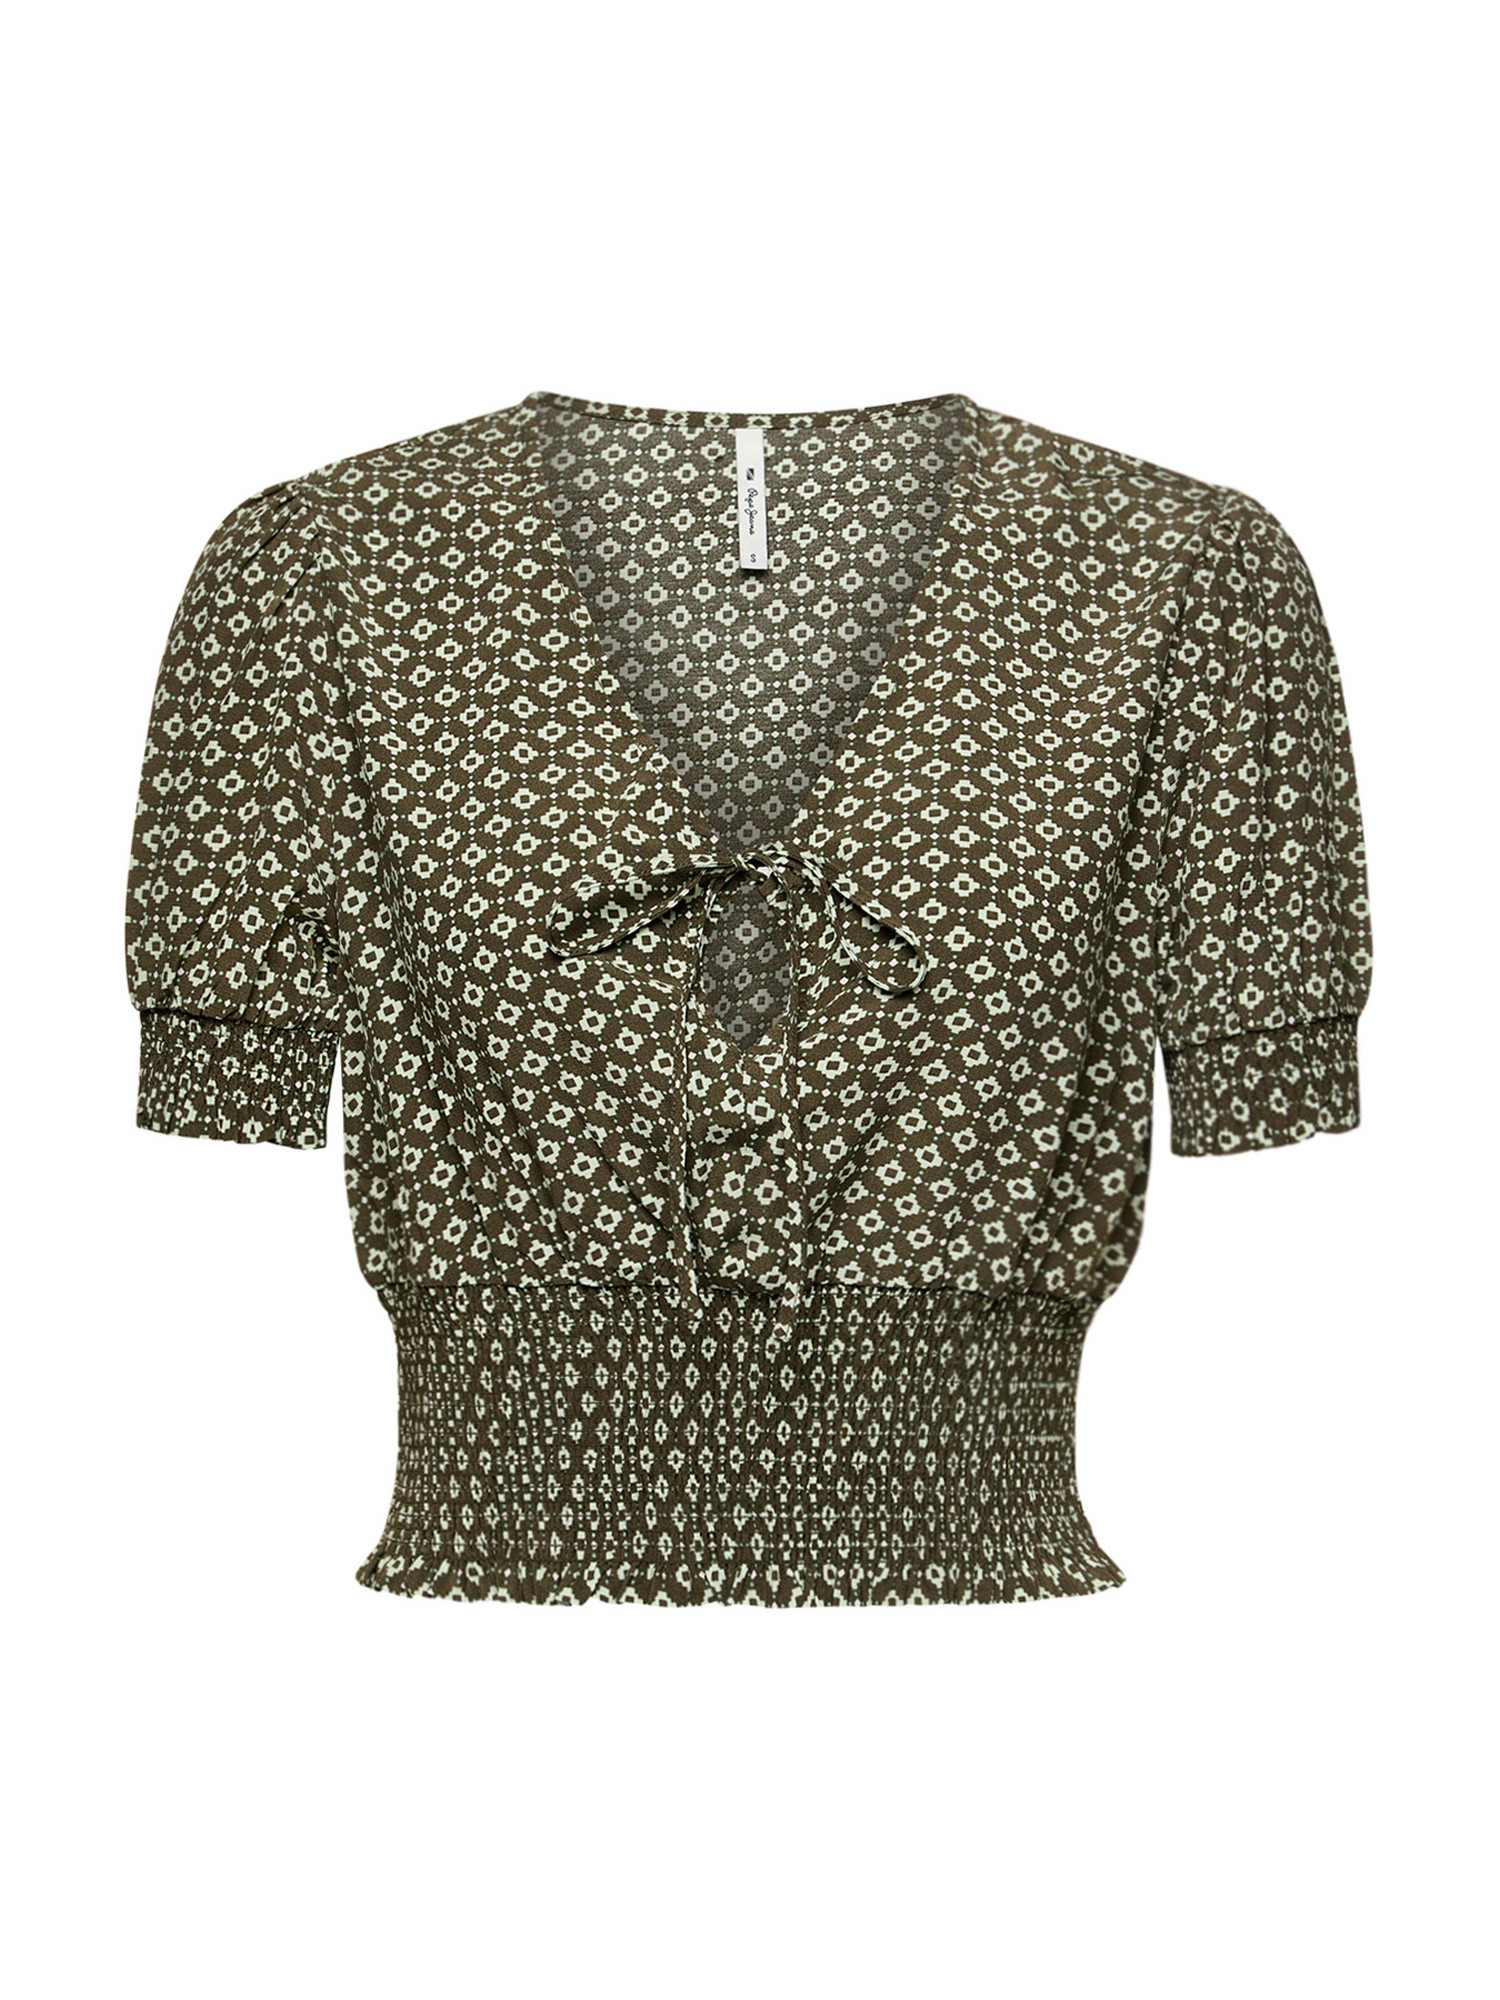 Pepe Jeans - Blusa con stampa geometrica, Verde oliva, large image number 0